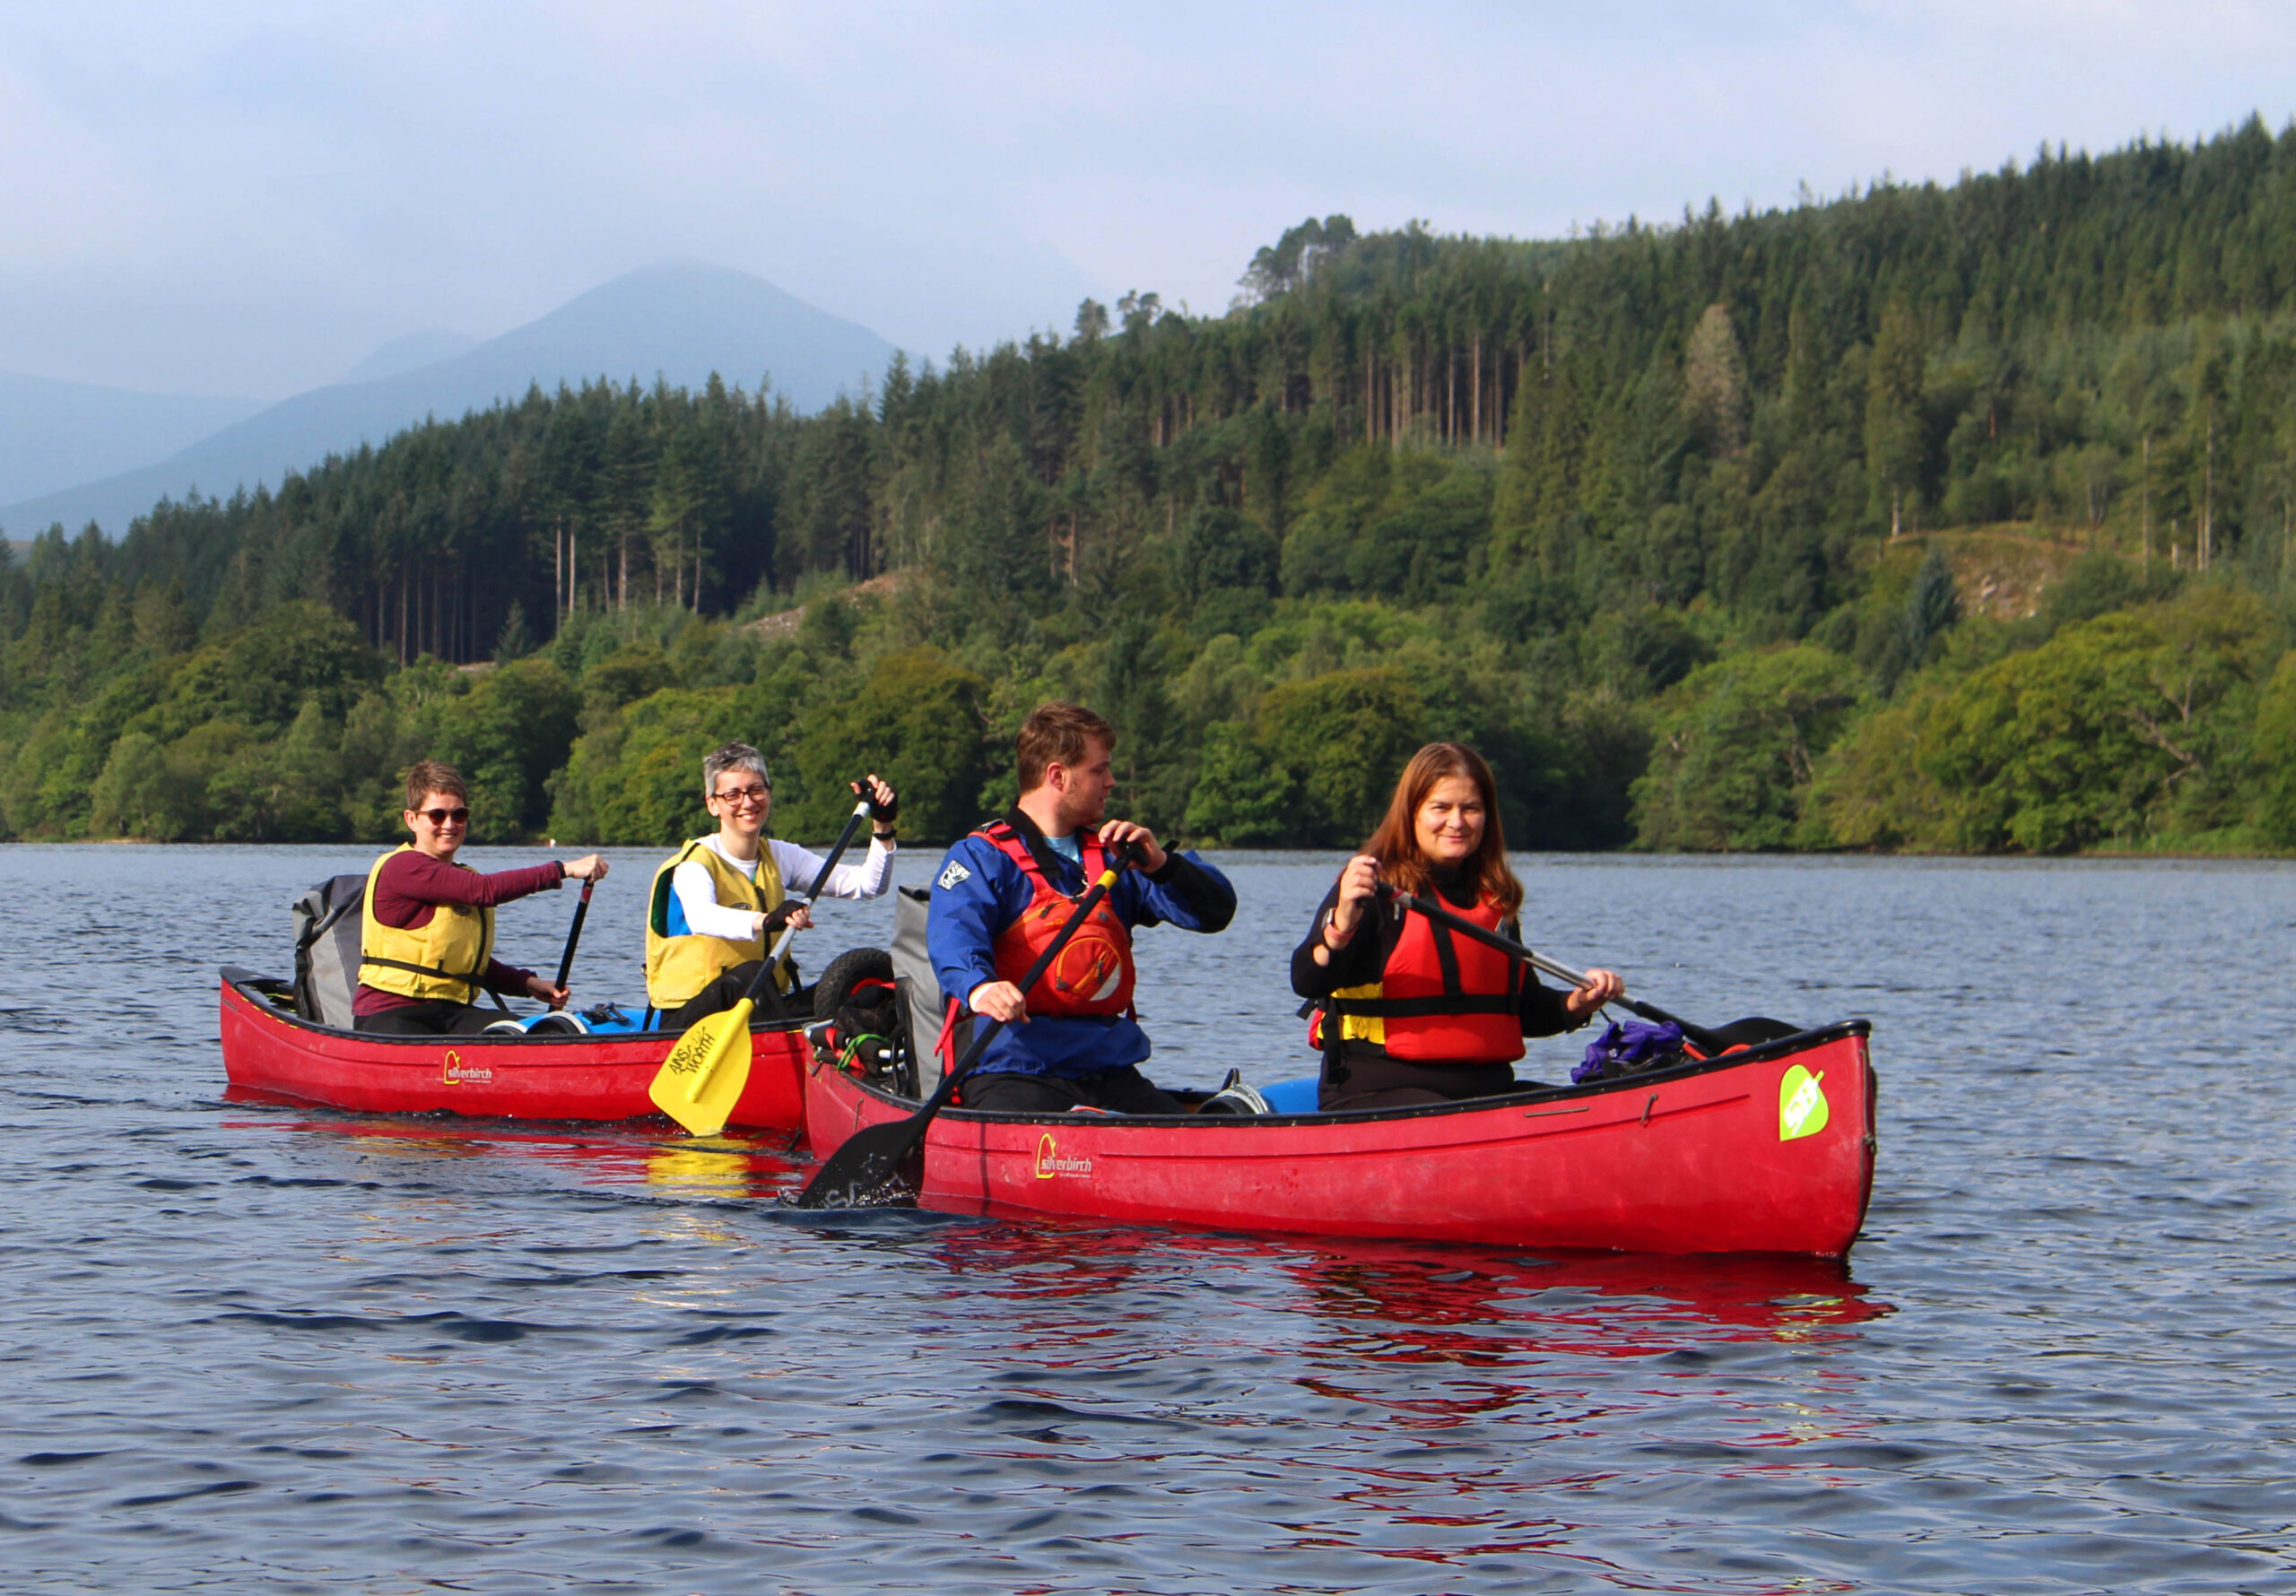 A group enjoying an Active Outdoor Pursuits Great Glen Way canoe holiday/journey.